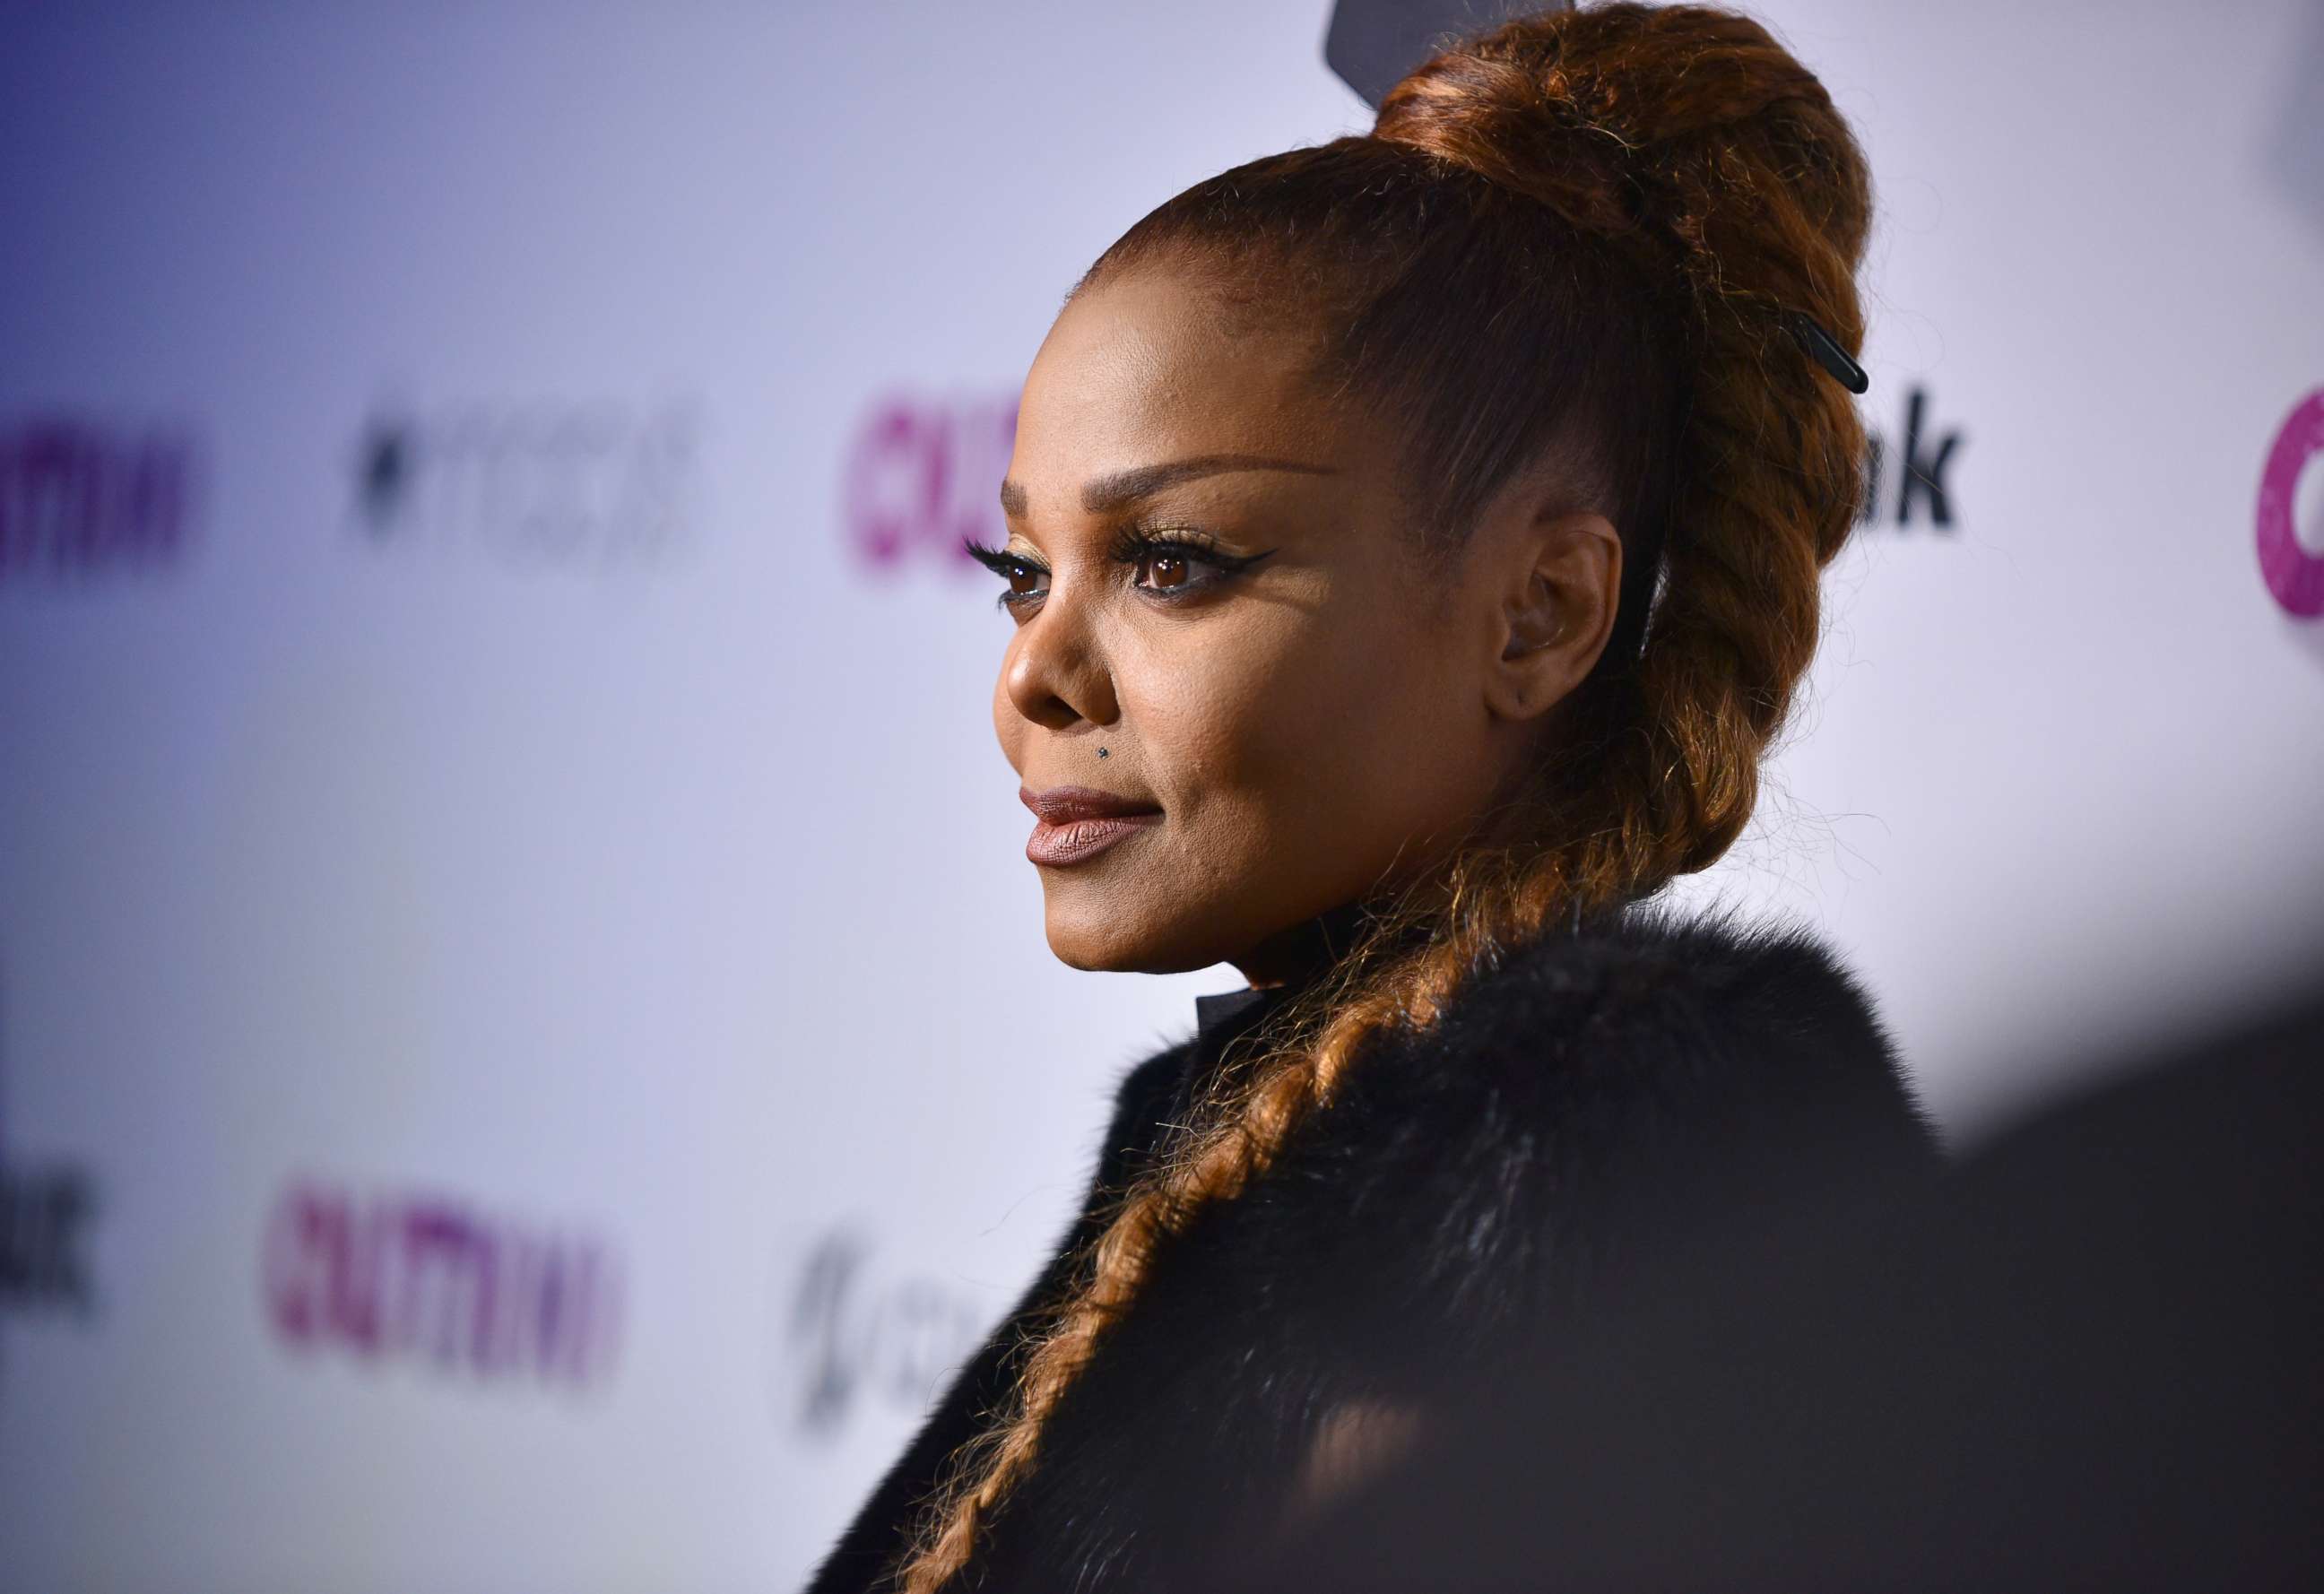 PHOTO: Janet Jackson attends an event at the Altman Building on Nov. 9, 2017 in New York.